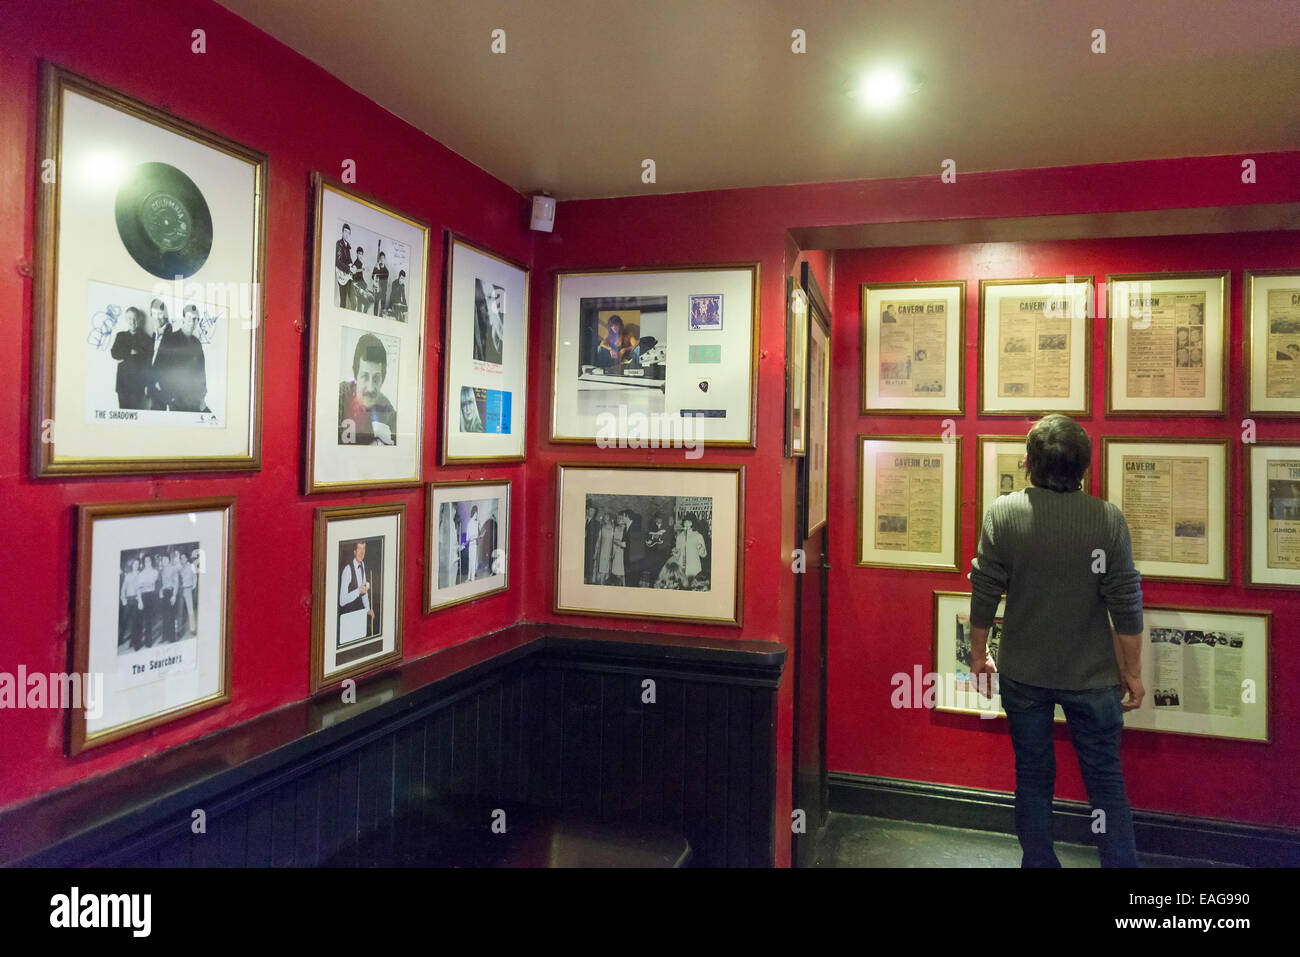 LIVERPOOL, ENGLAND - JUNE 8, 2014: The Cavern club in Liverpool Mathew Street. The Cavern Club is a rock and roll club in Liverp Stock Photo